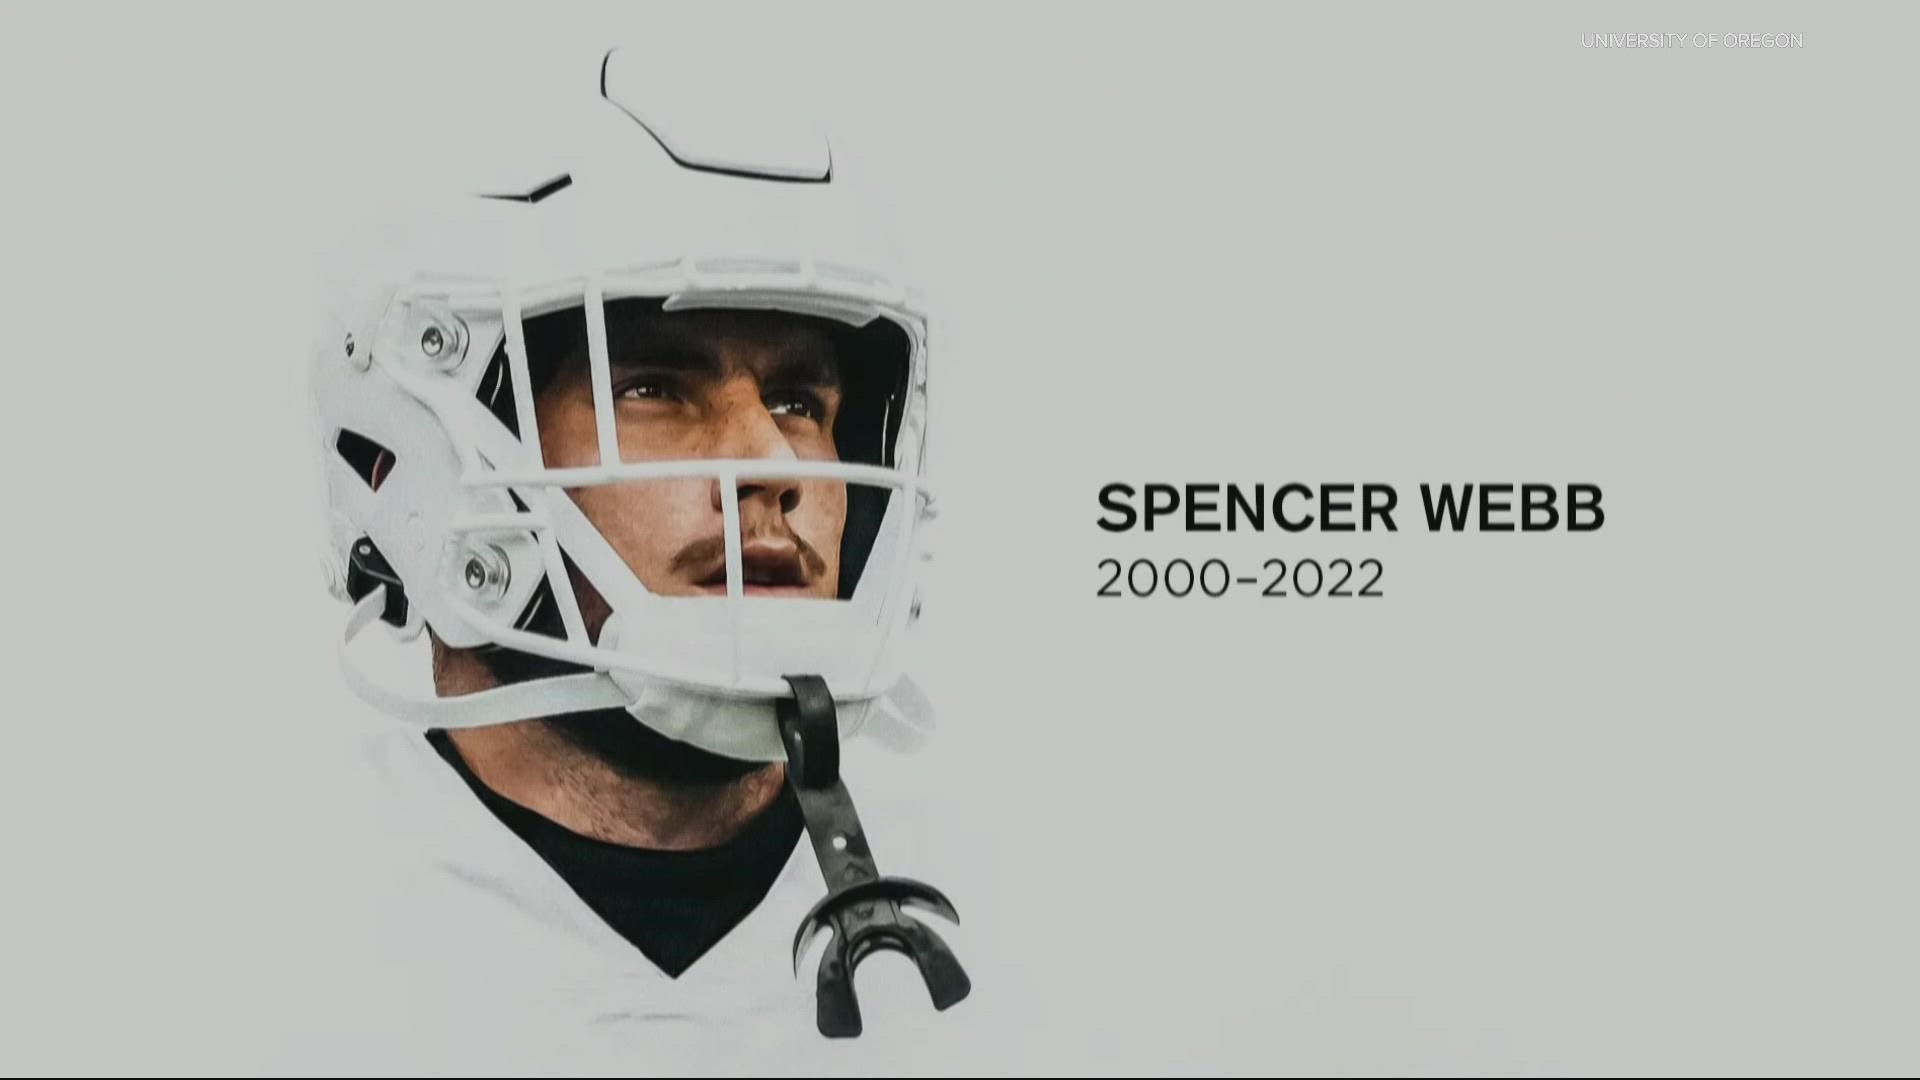 Friends, family and the University of Oregon community came together Thursday to mourn and celebrate the life of 22-year-old Spencer Webb, who died in a fall.